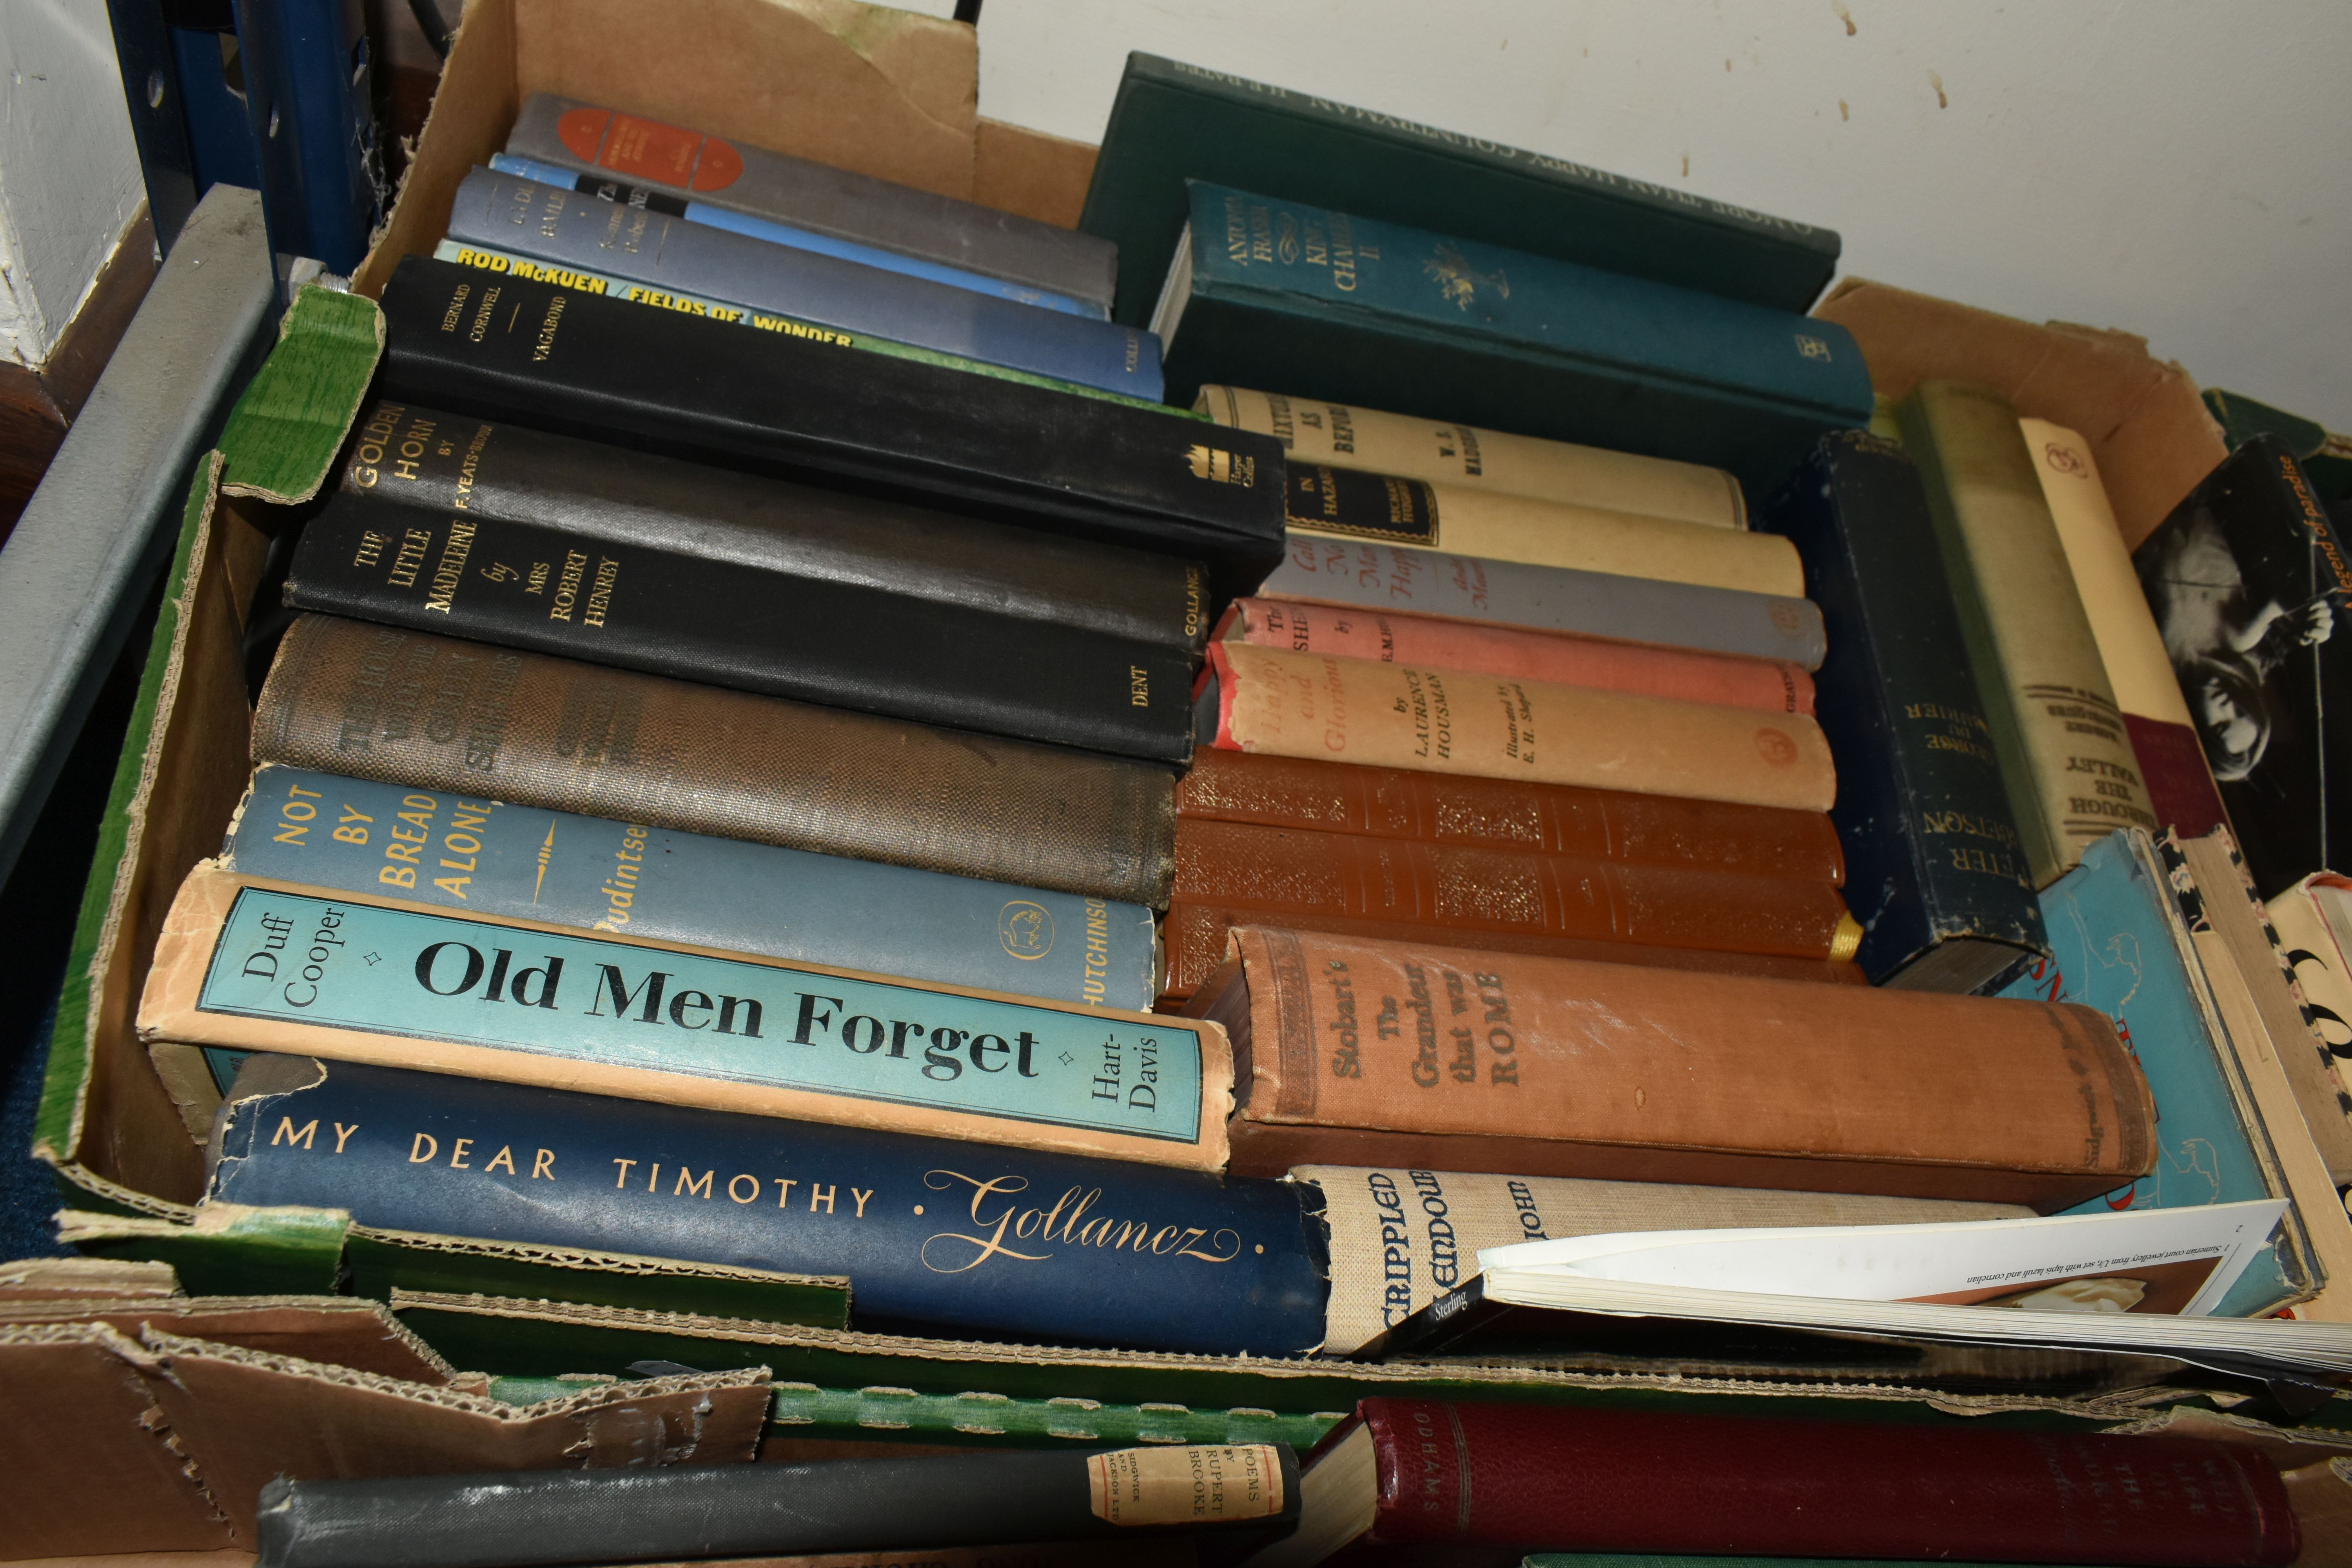 FOUR BOXES OF ANTIQUARIAN BOOKS, approximately eighty hardback books, titles include British Steam - Image 4 of 5